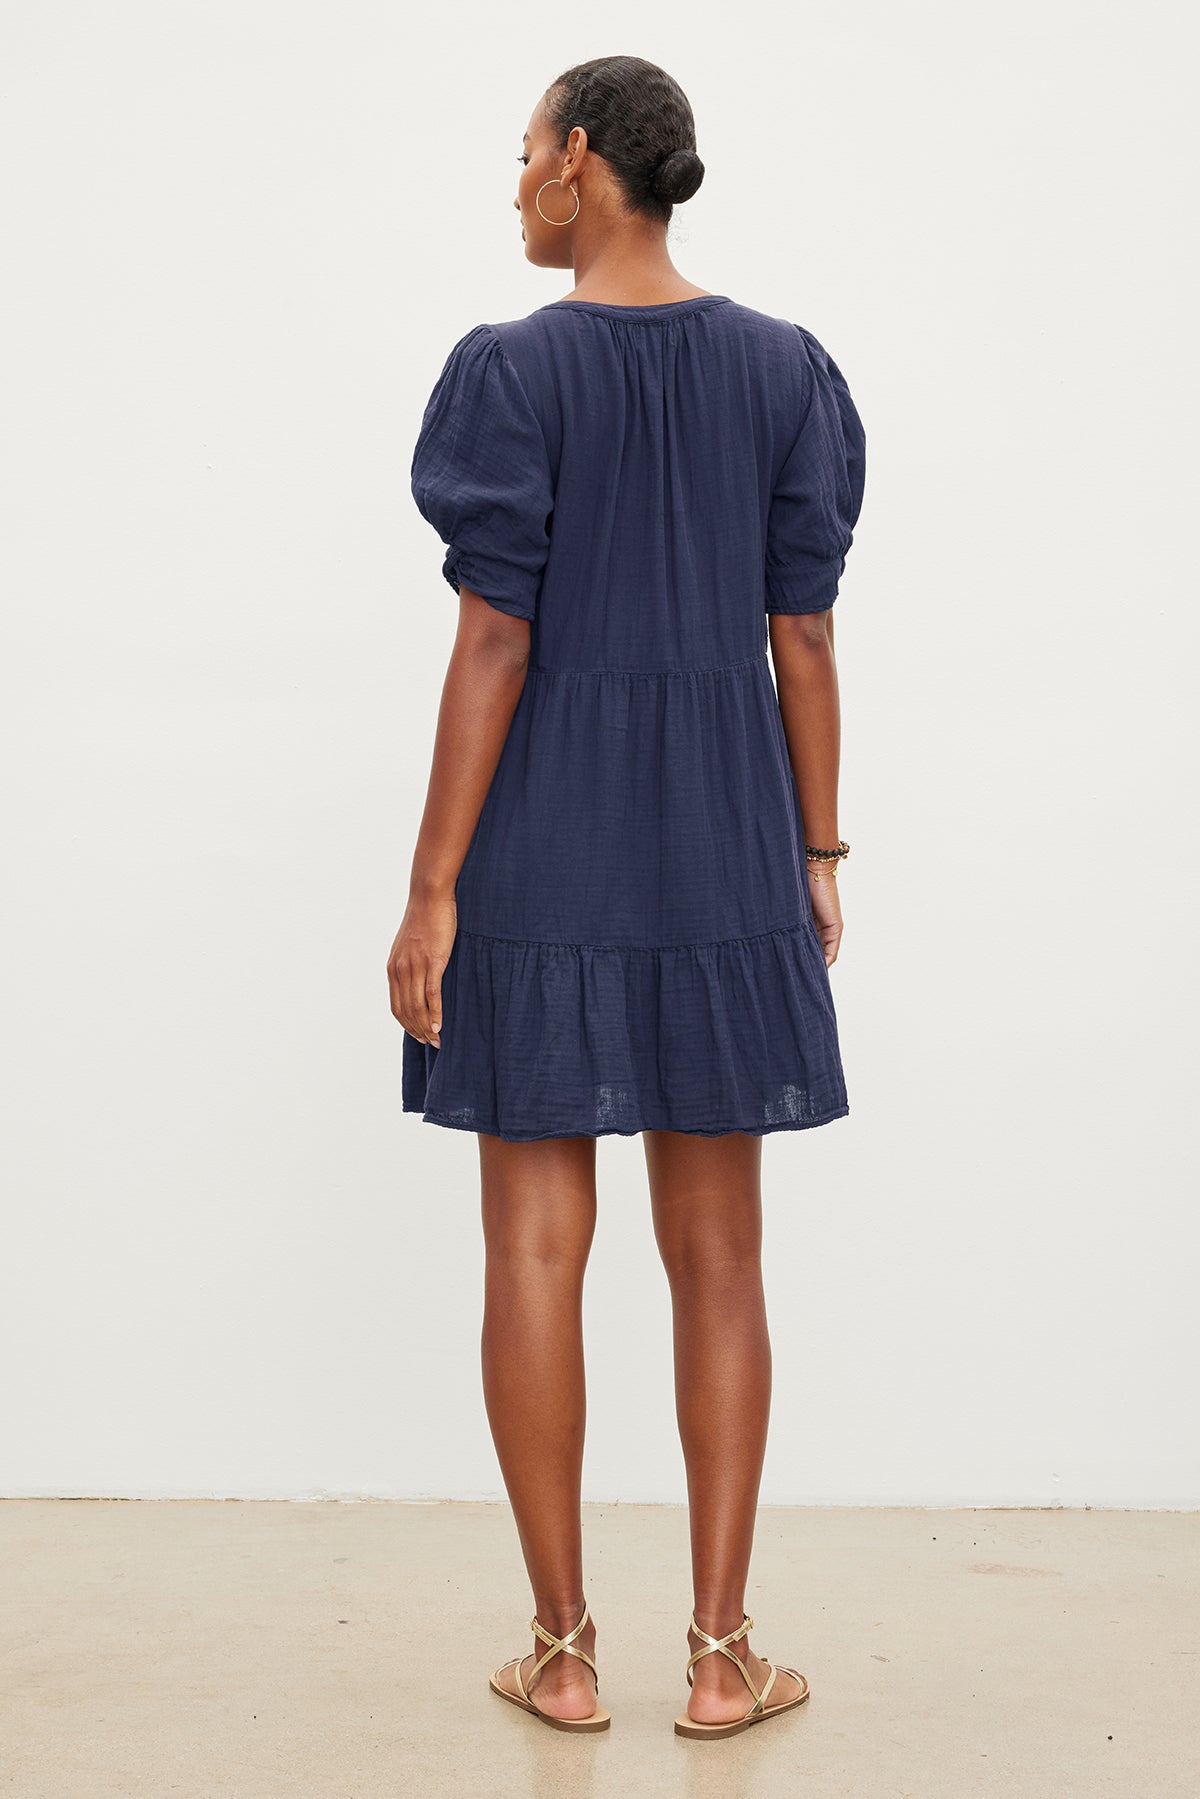 A person with short hair wearing a navy blue BELLA COTTON GAUZE DRESS by Velvet by Graham & Spencer and sandals is standing with their back to the camera against a plain white background.-37355941691585